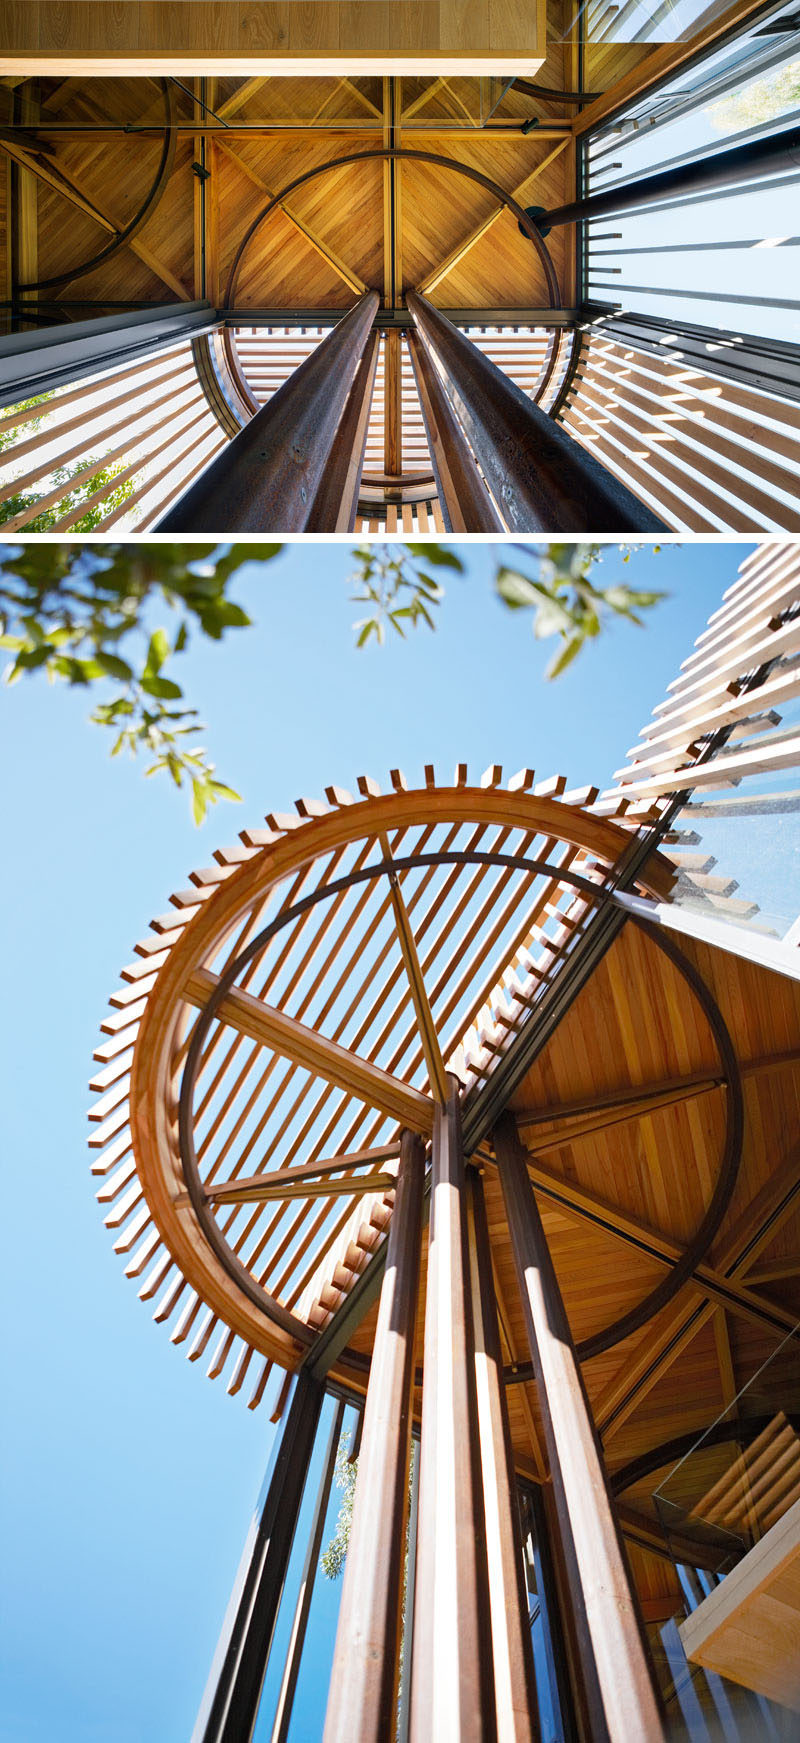 Throughout this modern tree house, you are able to see geometric structures that reveal how squares and circles have been used in harmony for the architectural plan of the house.